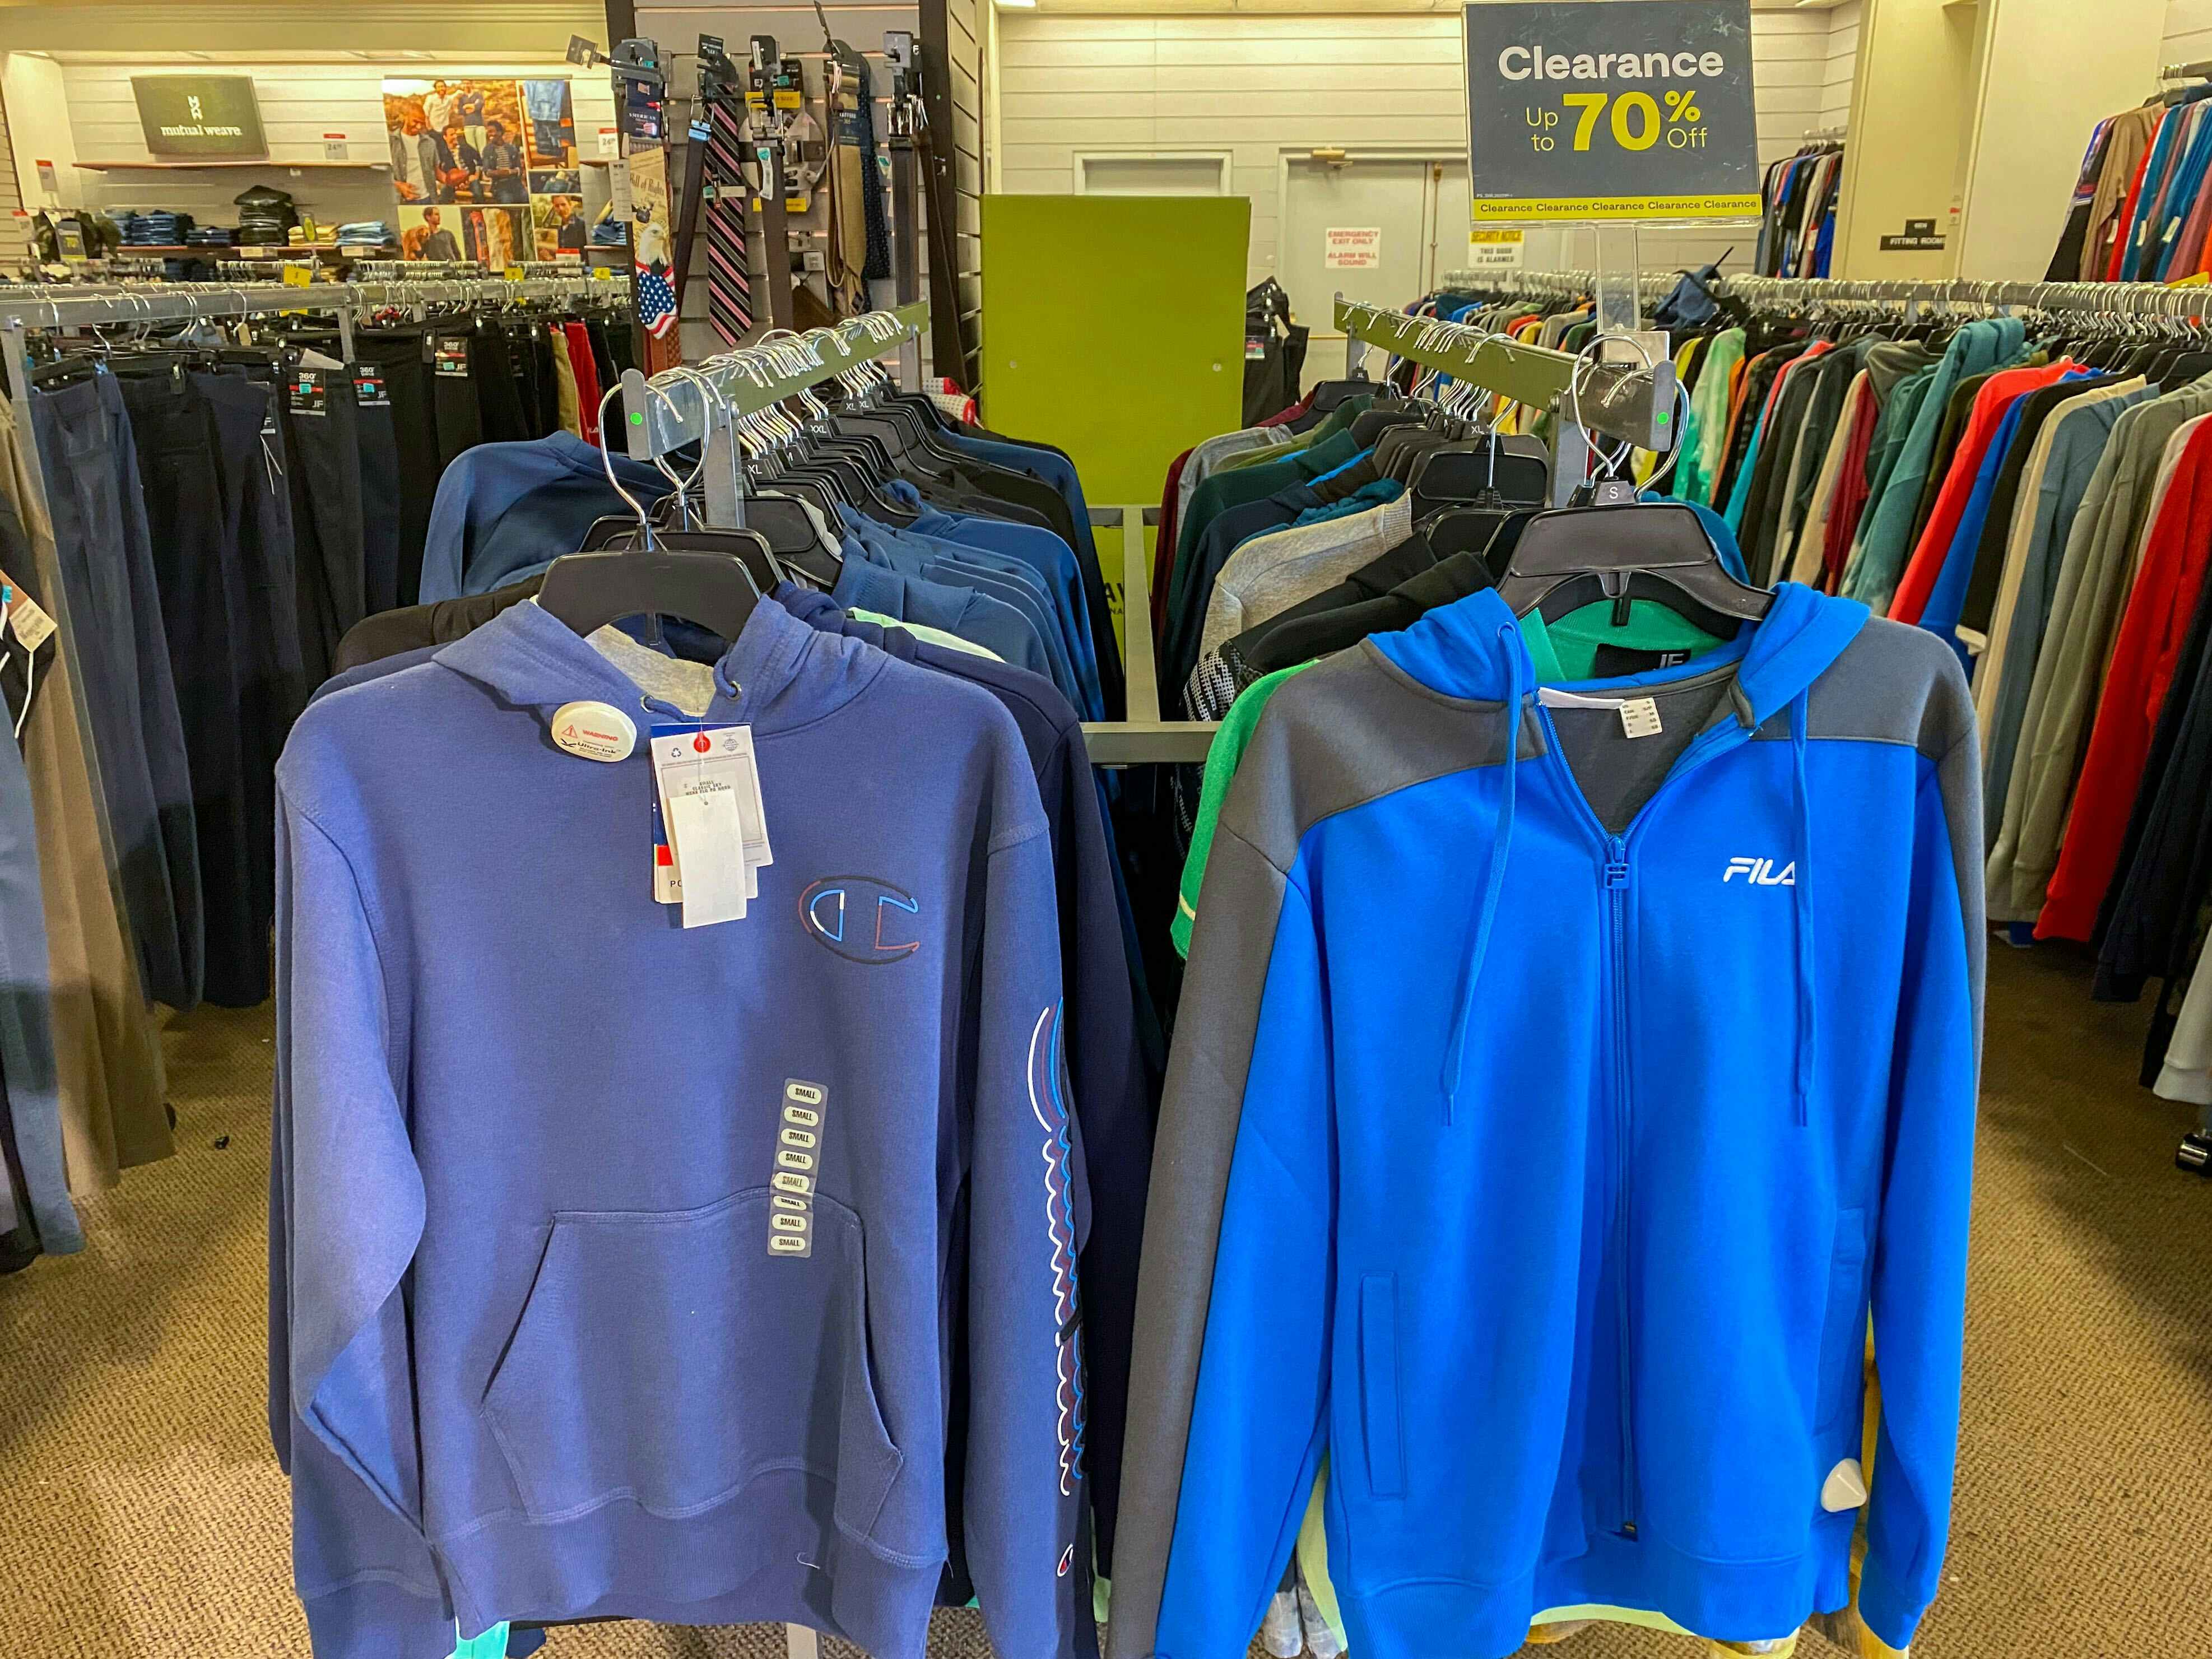 a blue champion and a blue fila sweatshirt by a clearance sign